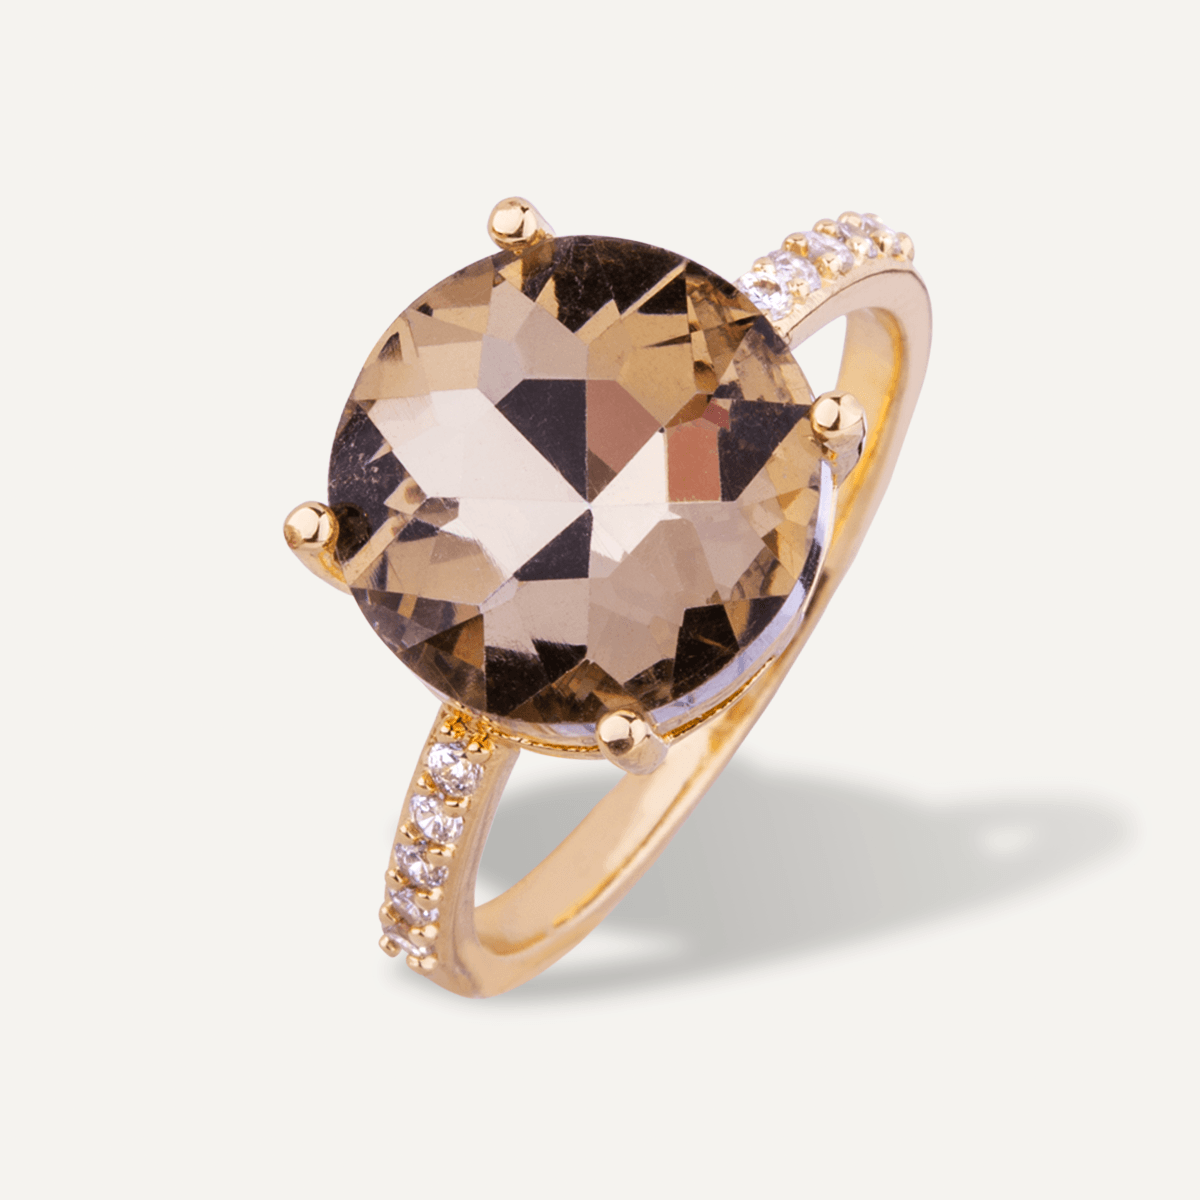 Regal Crown Ring with Champagne Topaz Crystal | Susan Forde Jewellery